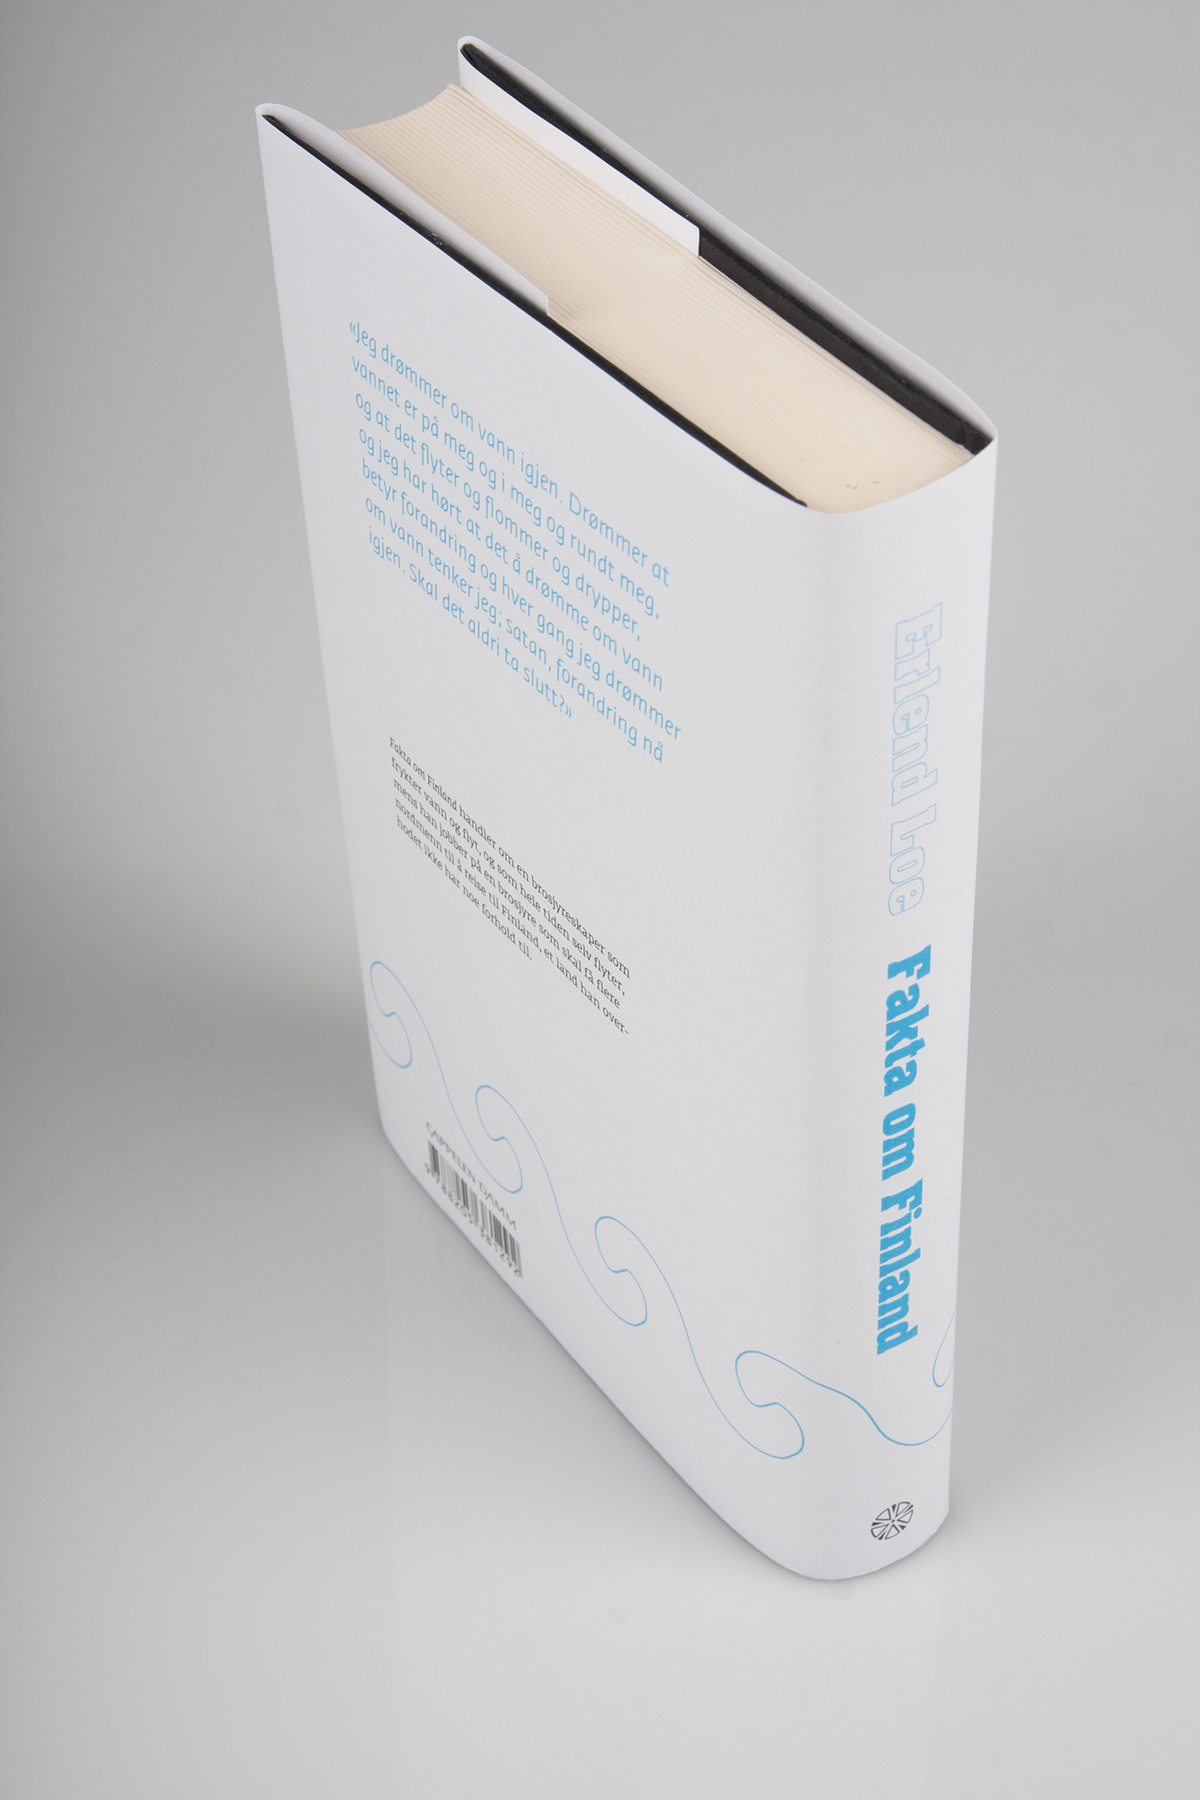 simplistic naivistic bookcover bookjacket erlend loe faktaomfinland minimalist blue finland 2-color water isotype Drowning